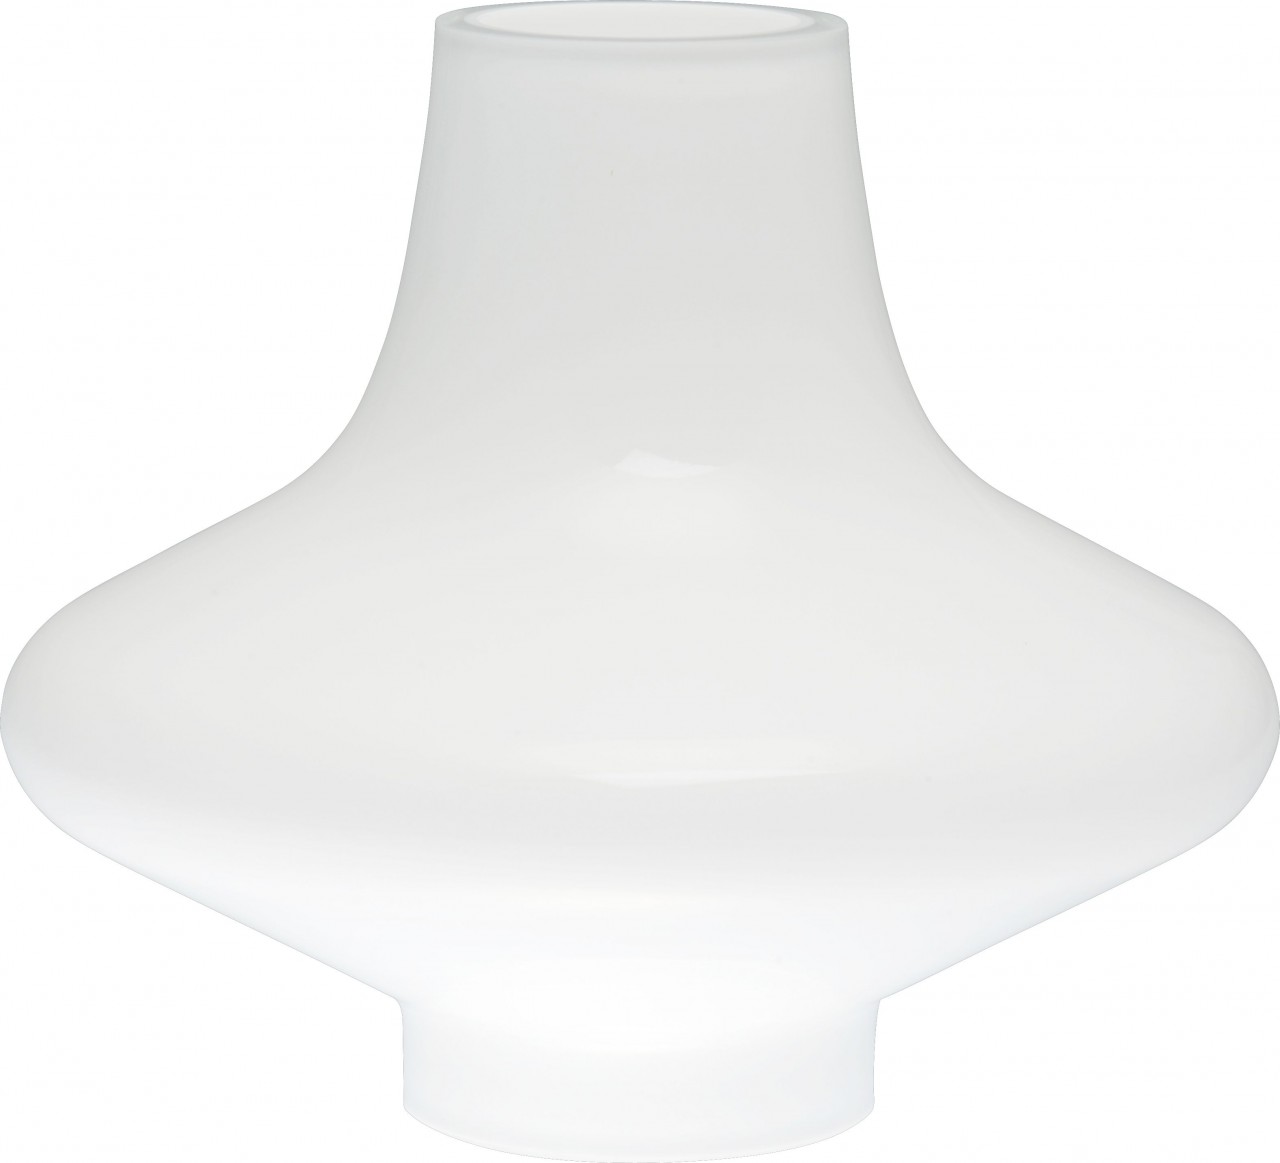 Lamp shade for PETRONELLA lamp by DELITE